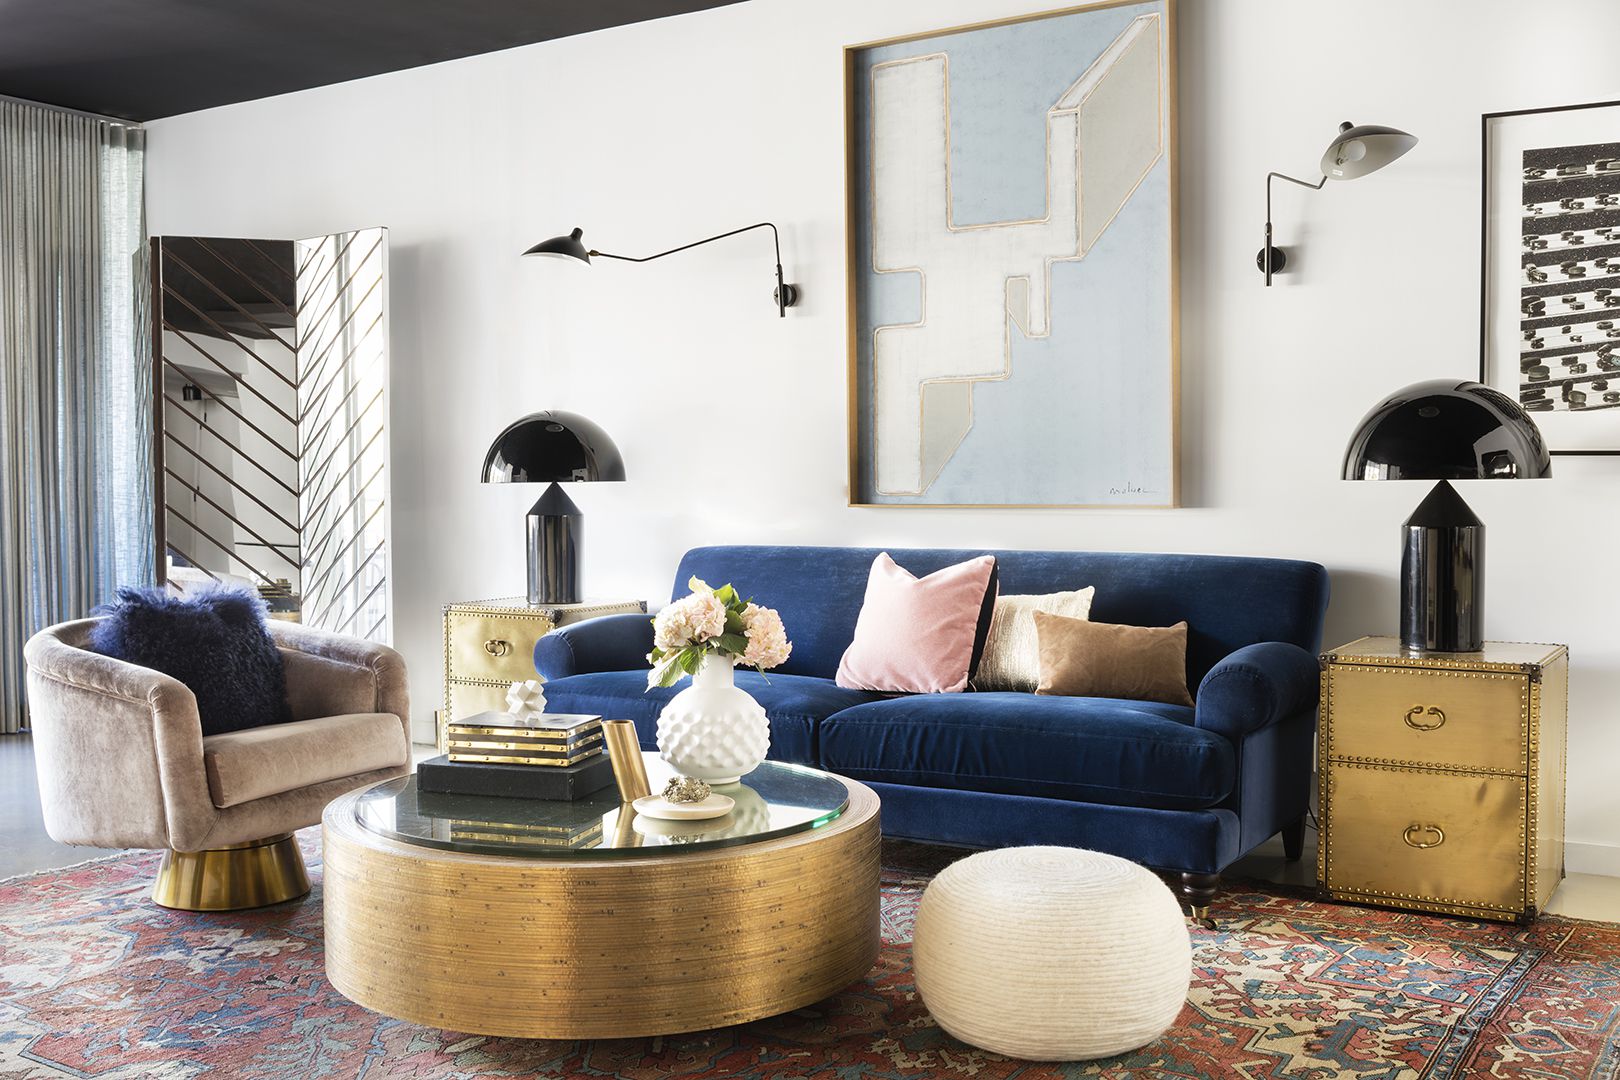 Sweet Tooth's Guide To Home Improvement: Creating A Sweet And Stylish Space